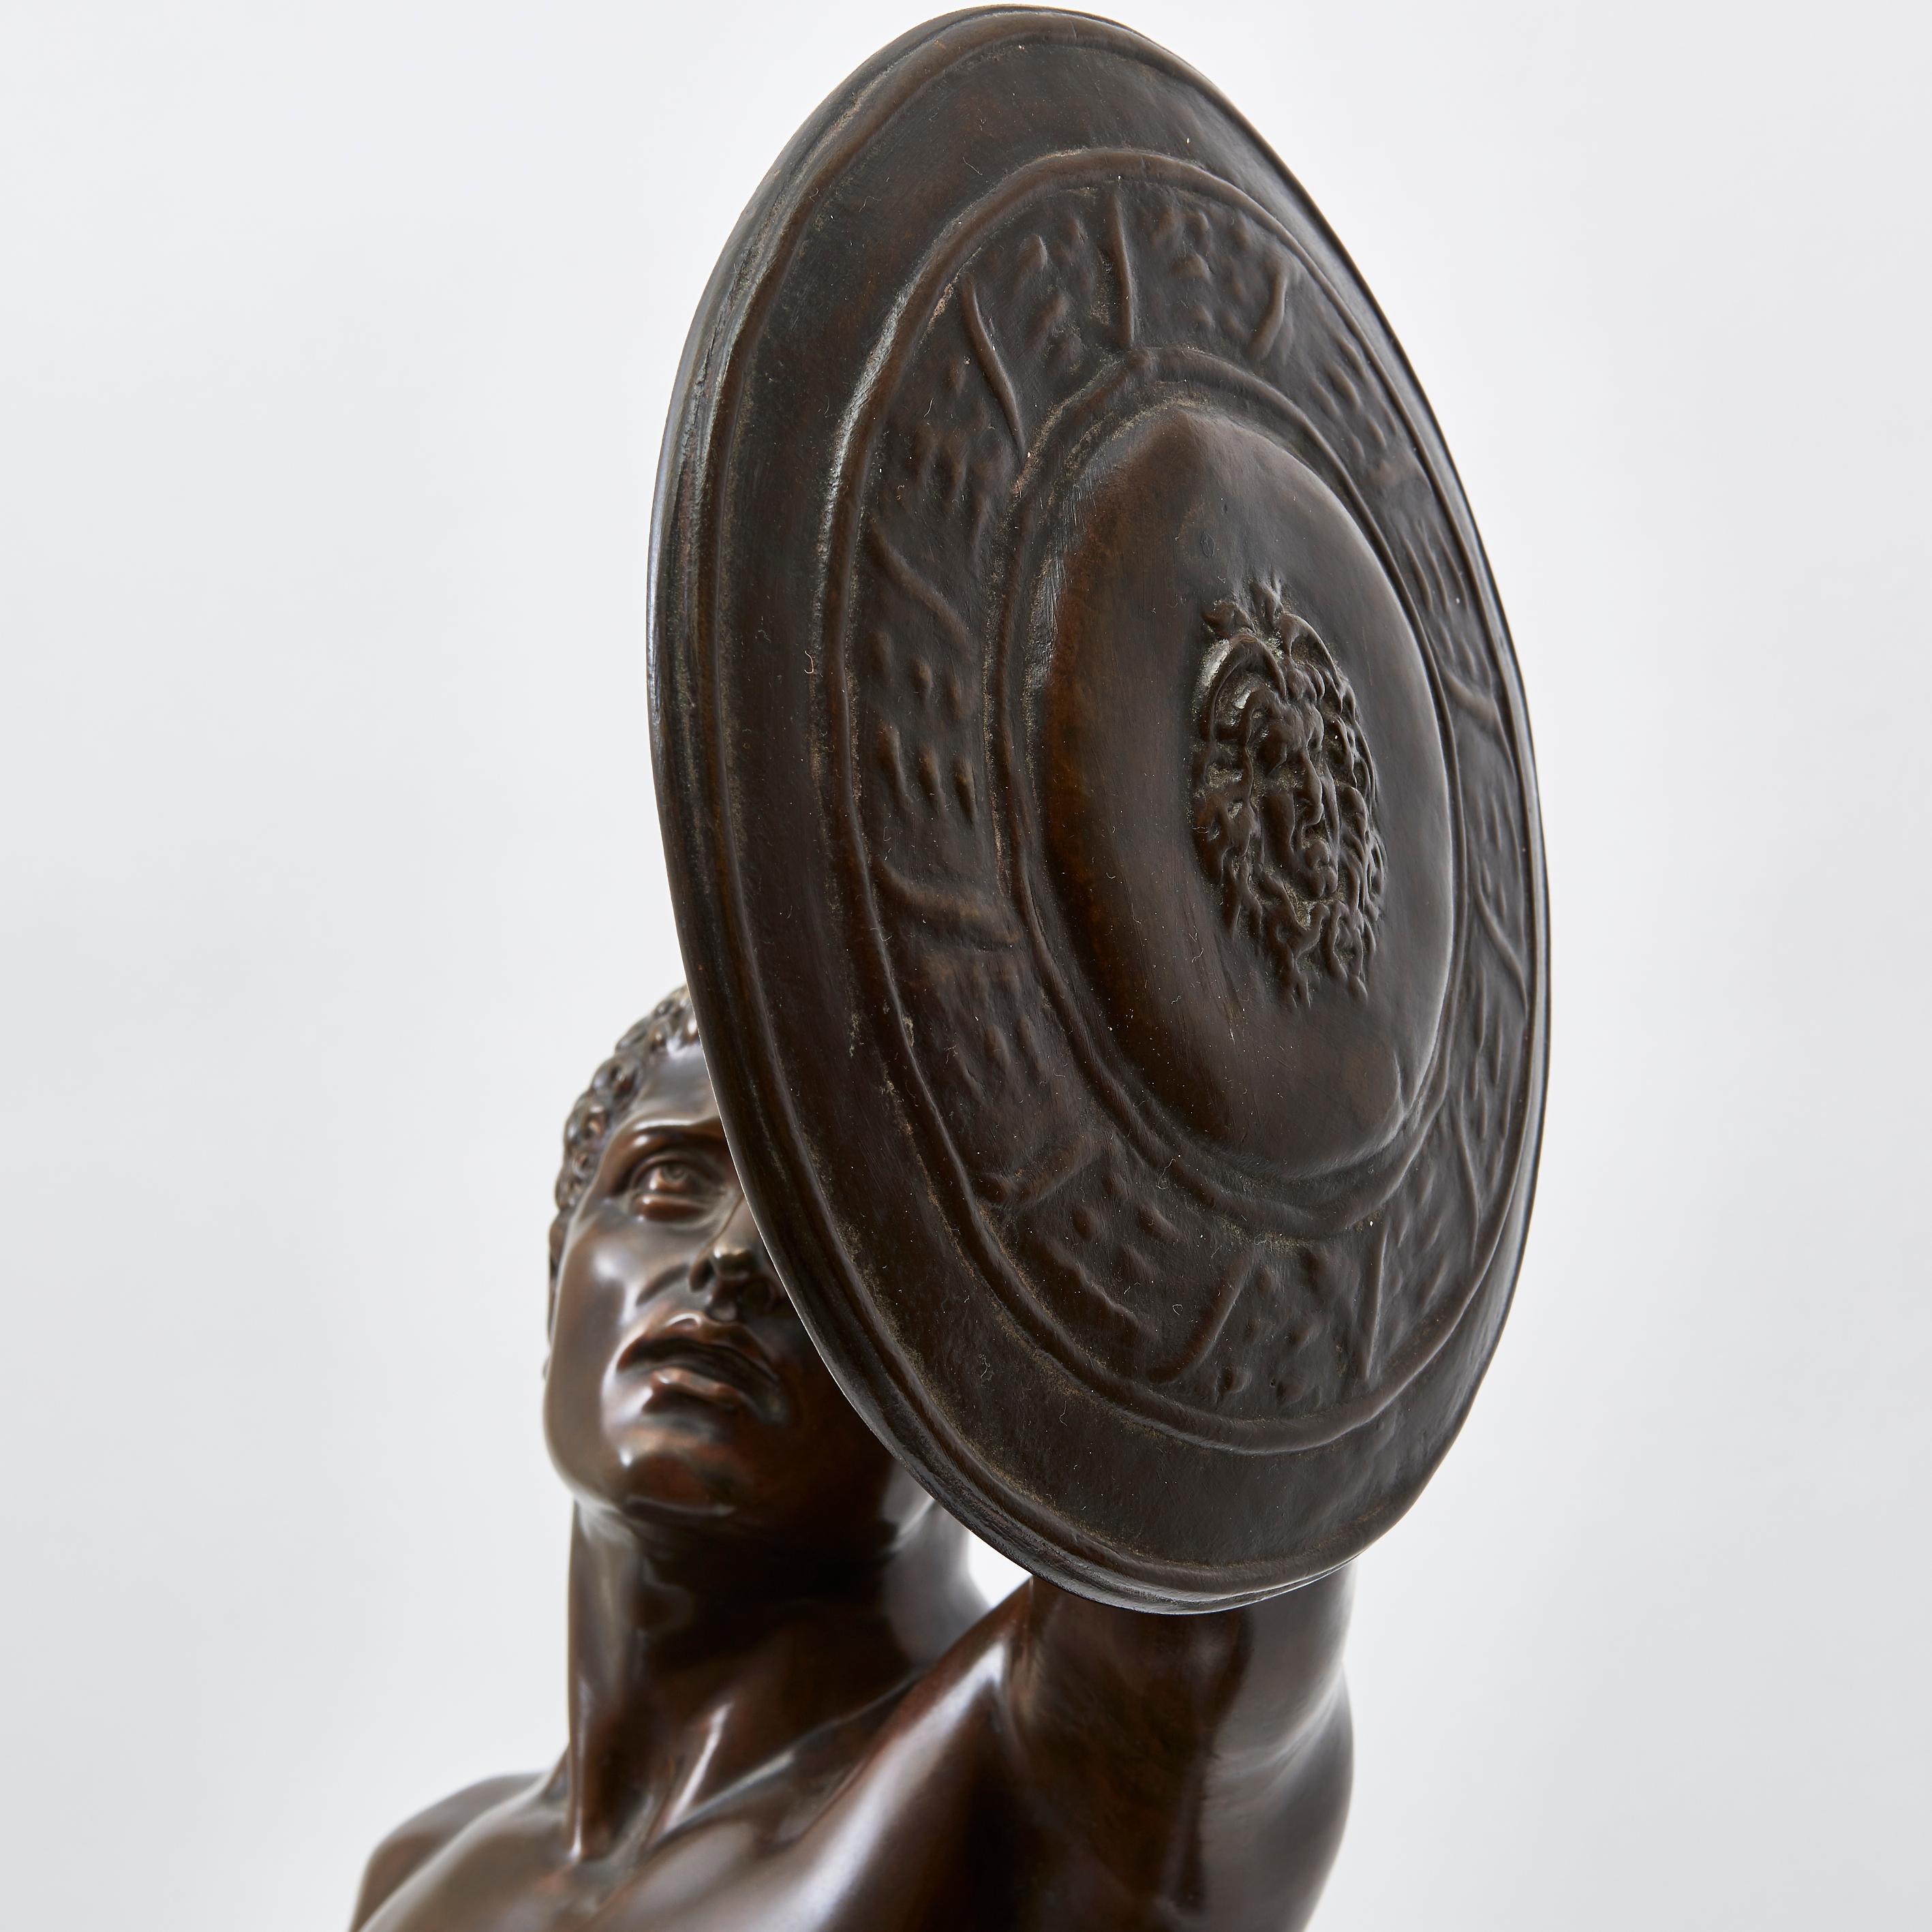 Bronze Sculpture of a Gladiator by French Sculptor Emile Guillemin, 1841-1907 For Sale 1